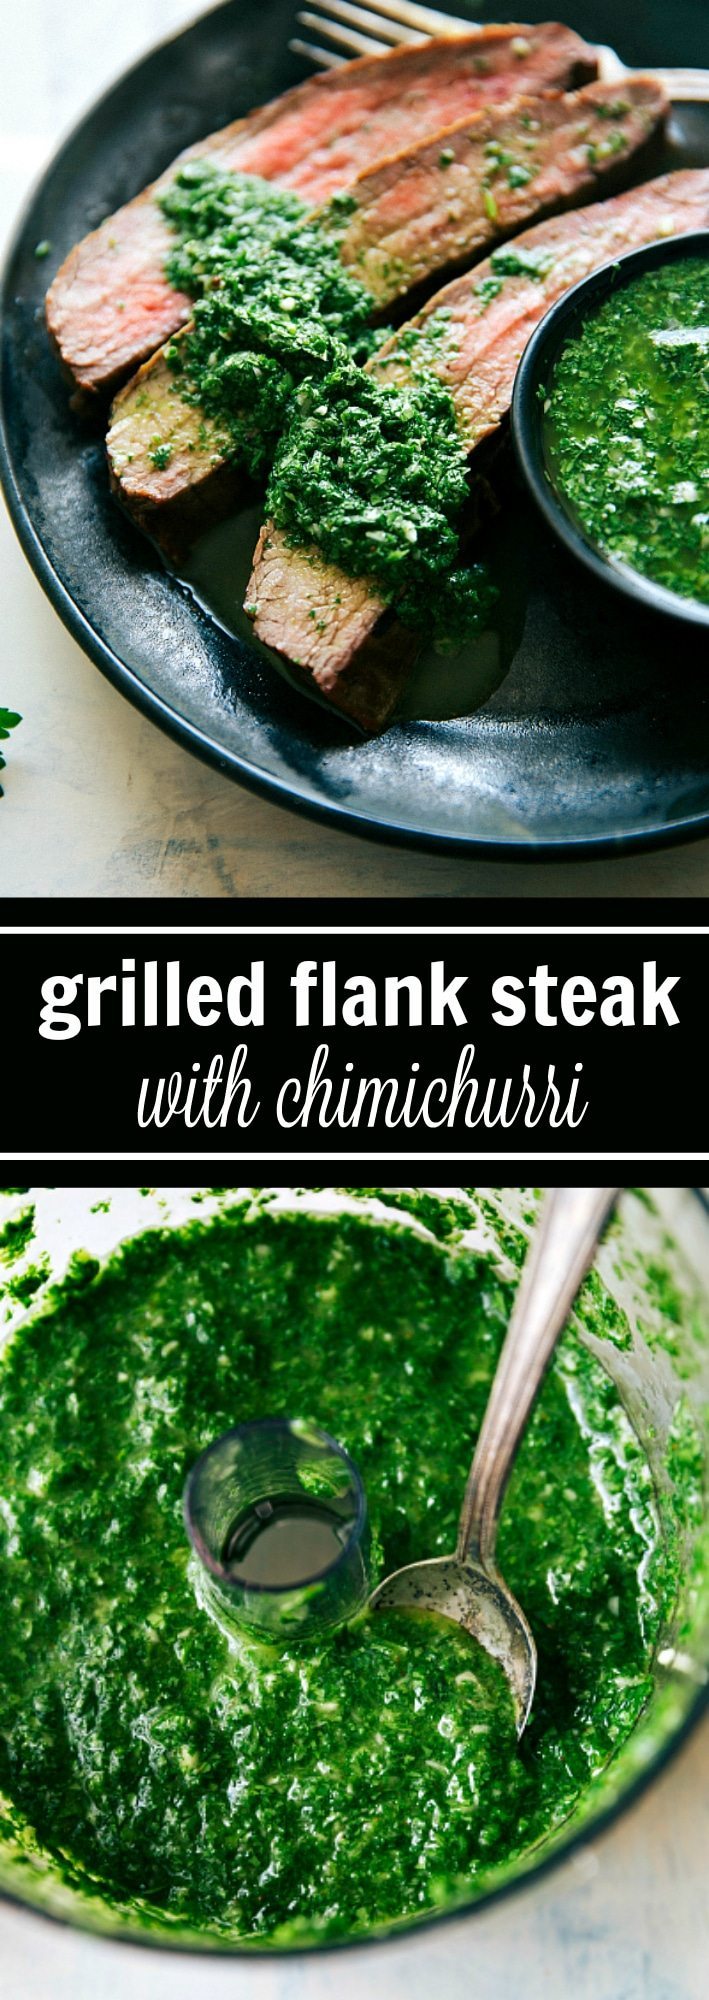 Easy grilled flank steak with a delicious marinade and an easy cilantro-parsley chimichurri. This grilled flank steak recipe includes a simple marinade, easy rub, and a delicious chimichurri sauce. Recipe from: chelseasmessyapron.com